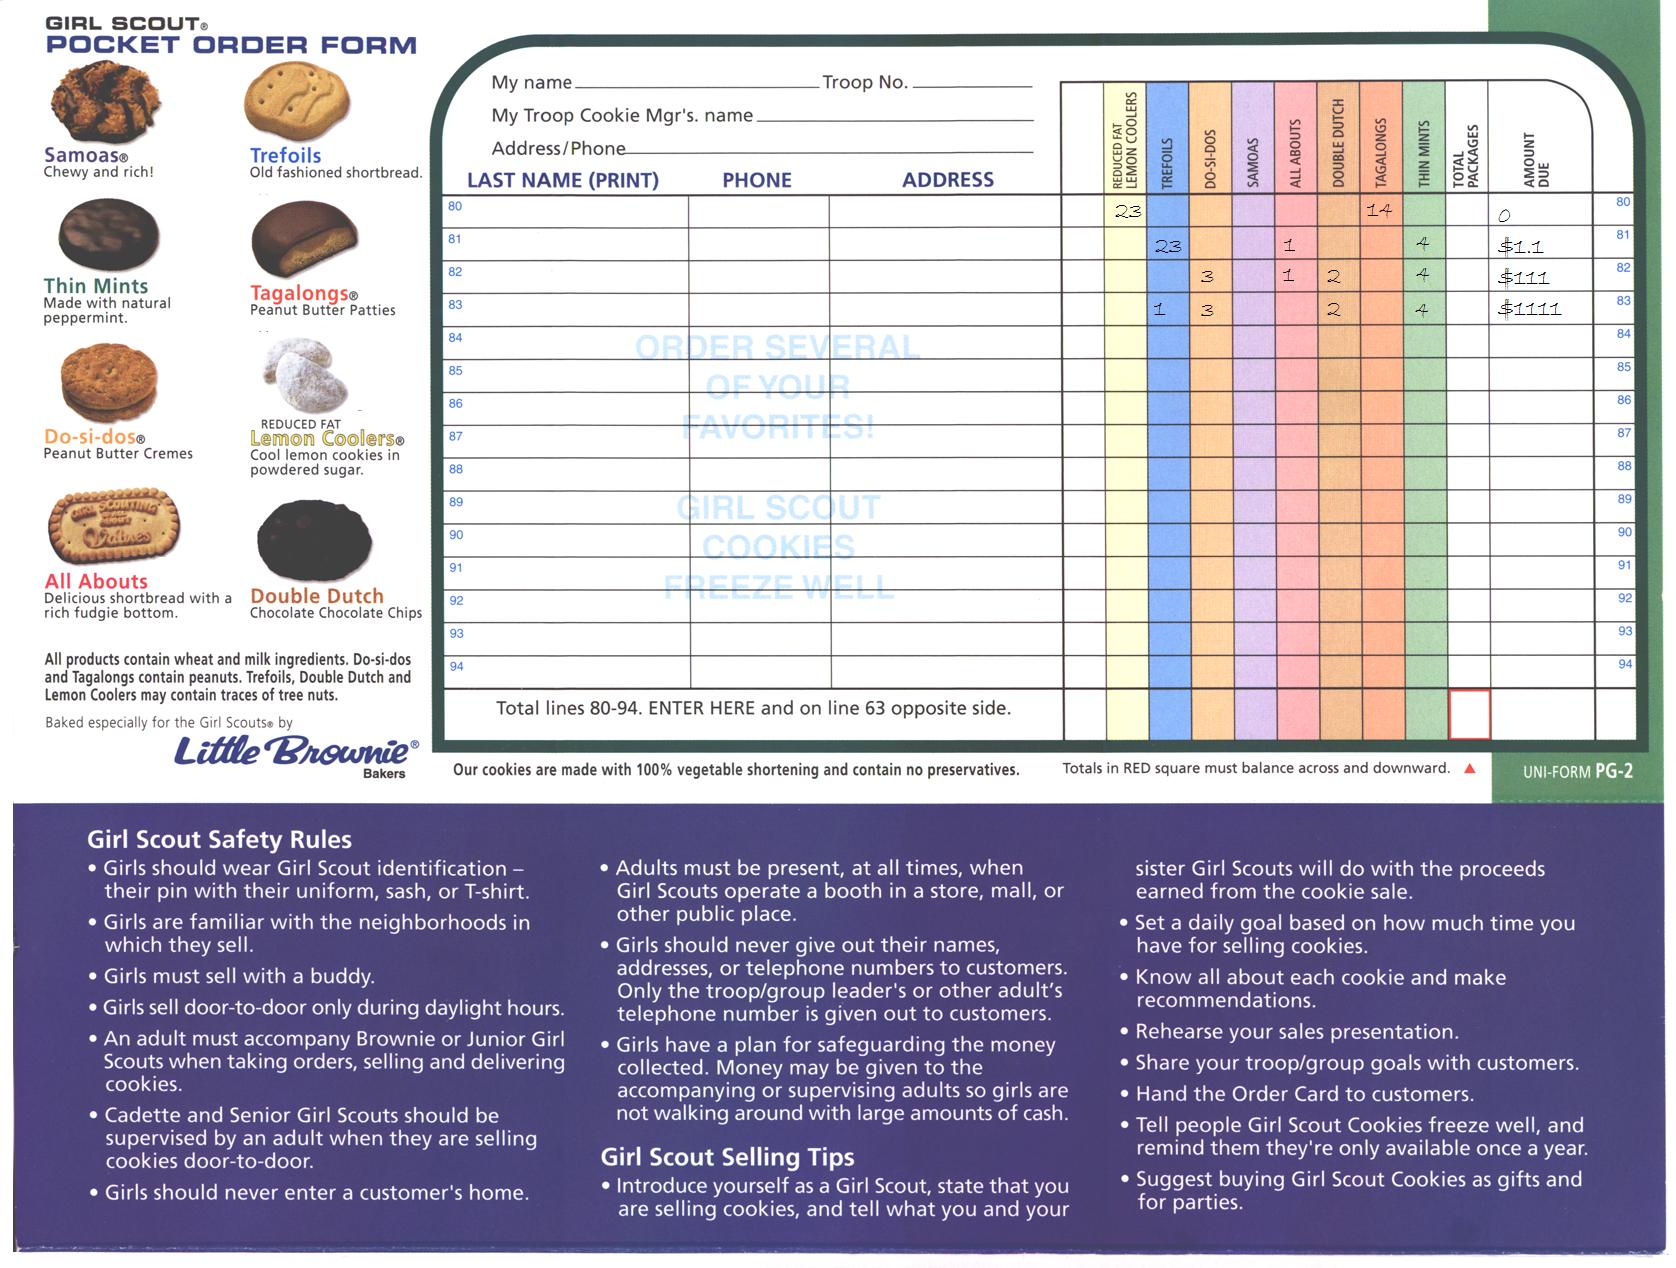 Girl Scout Cookie Order Form 2016 amulette